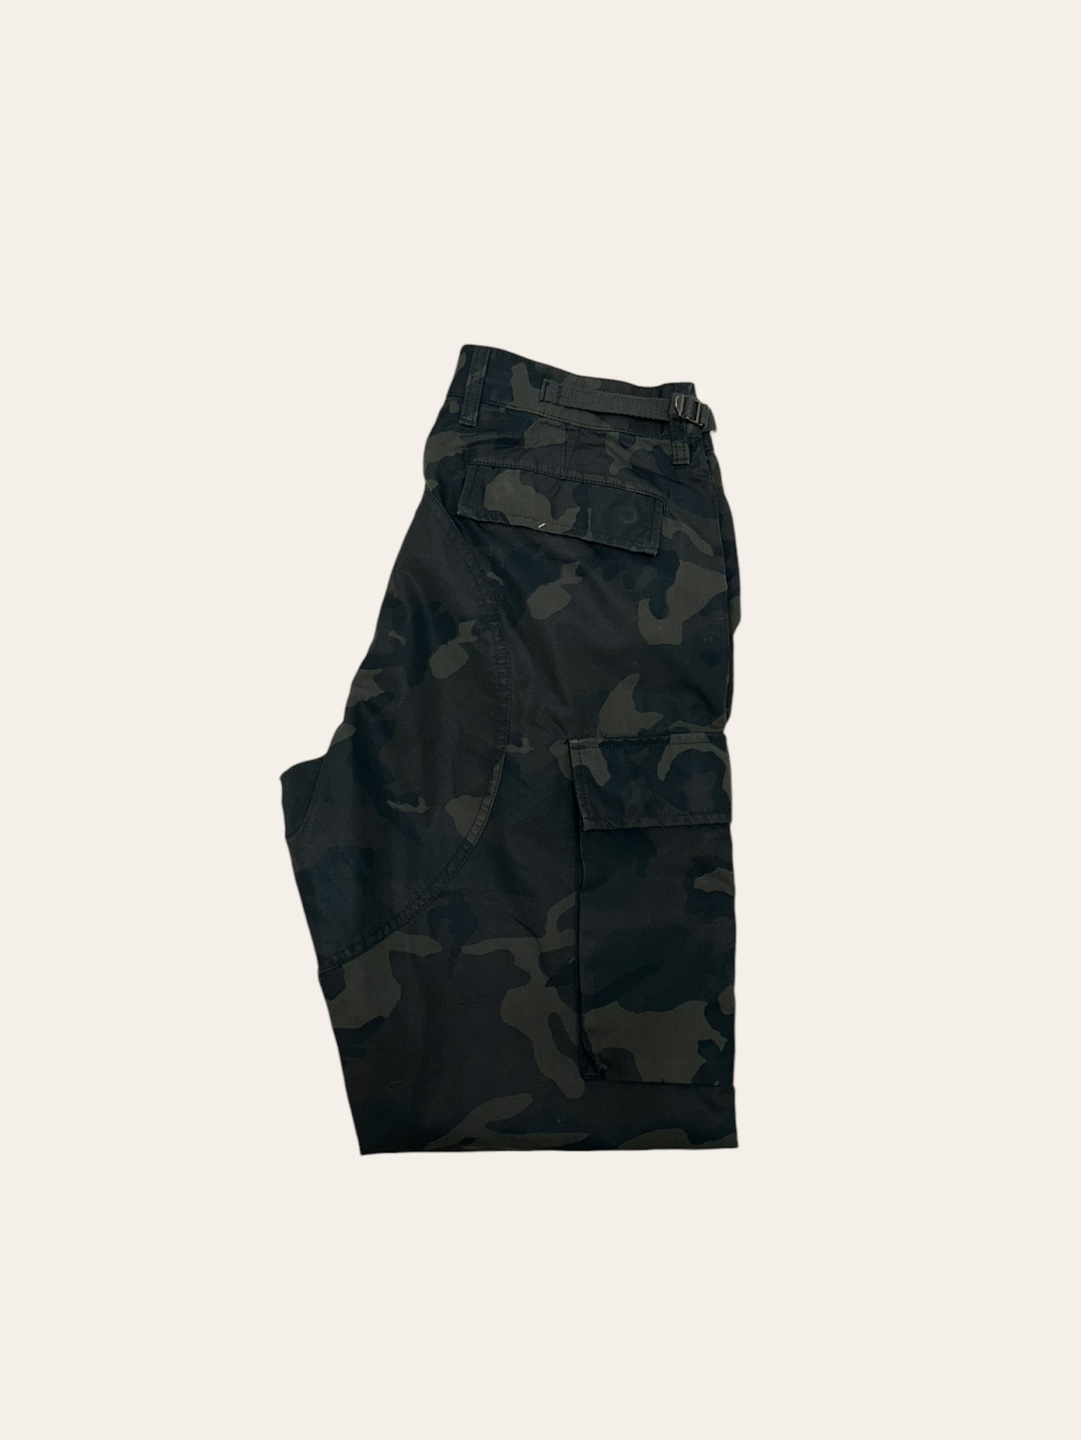 Wallace &amp; Barnes by Jcrew camouflage ripstop cargo pants 30x30